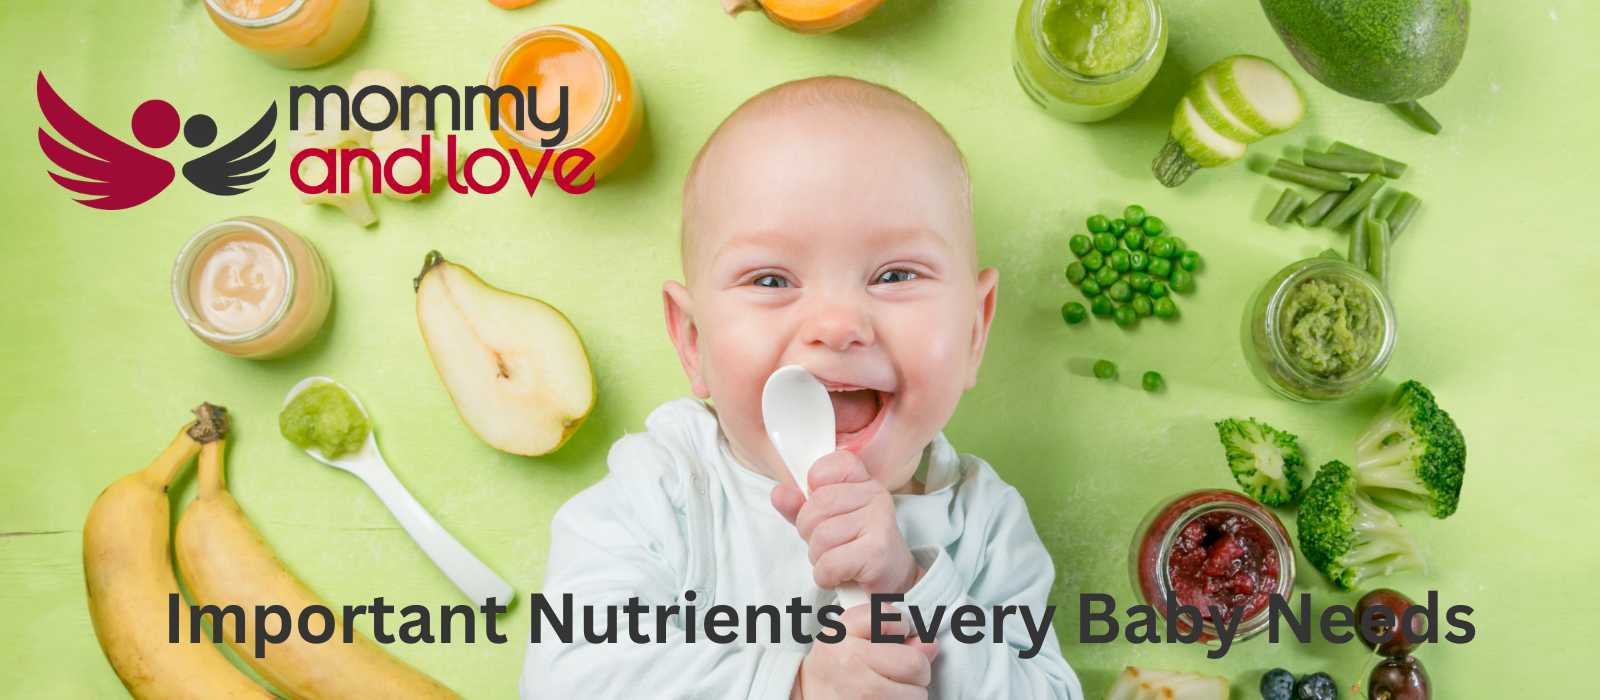 Important Nutrients Every Baby Needs